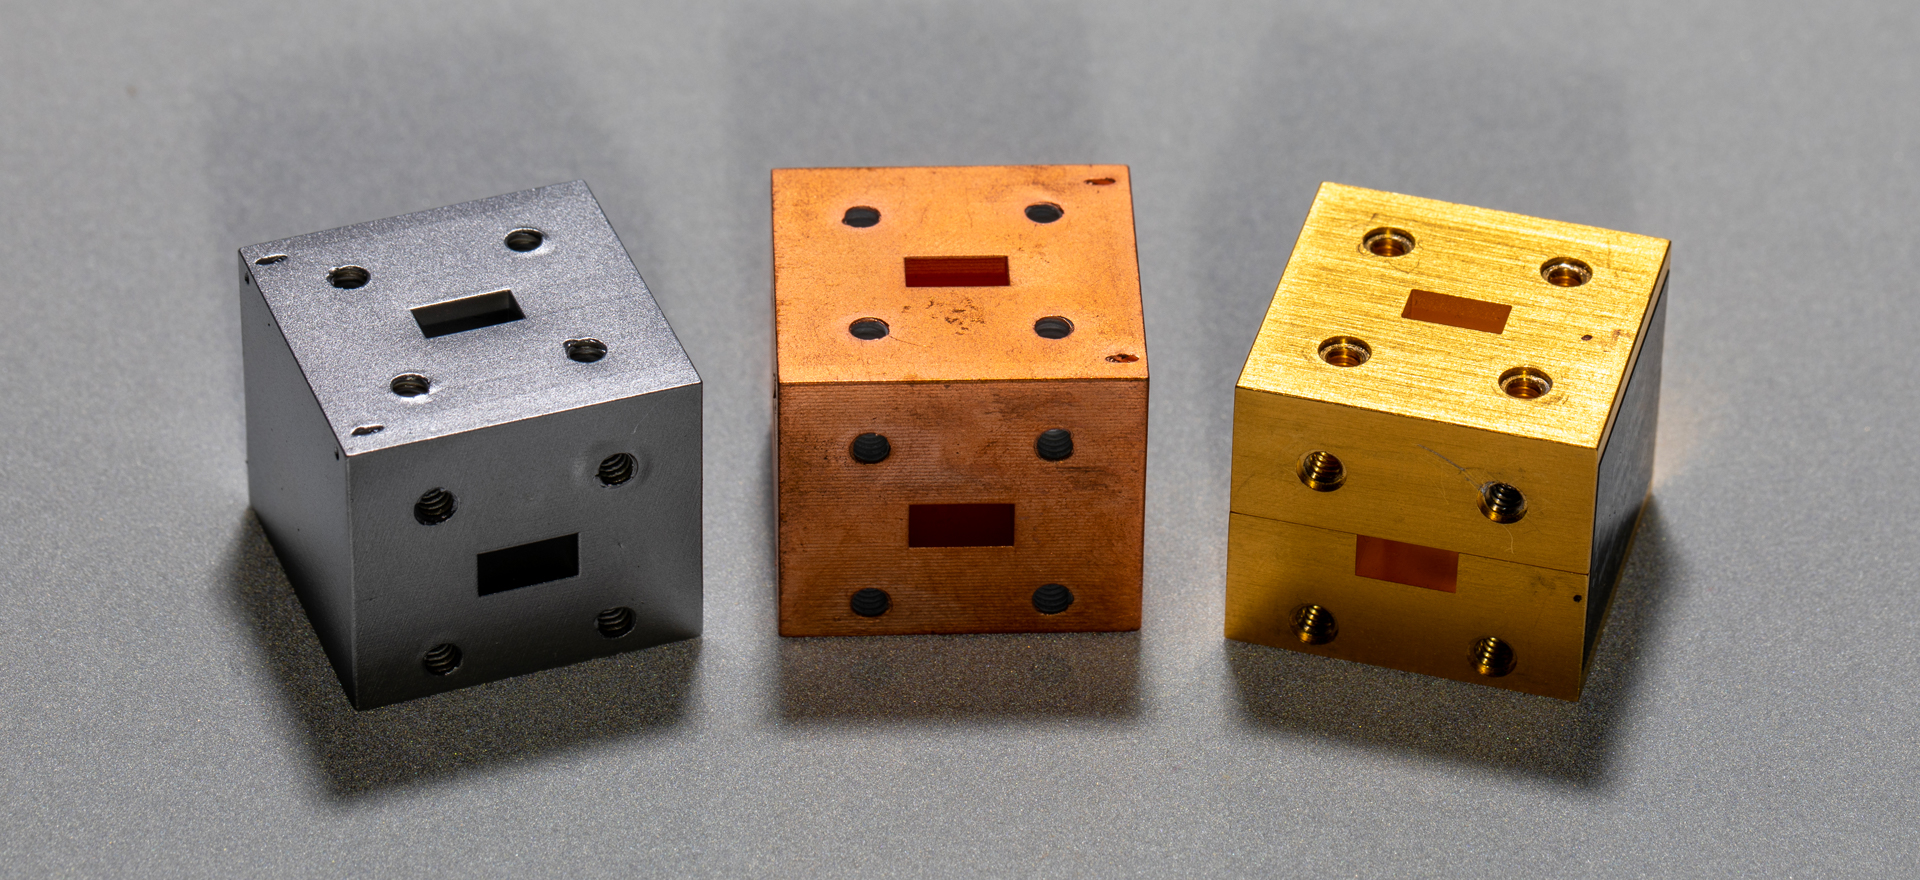 Three small 3D printed cubes on table. The first is silver in color, the second is copper color, the third is gold color.